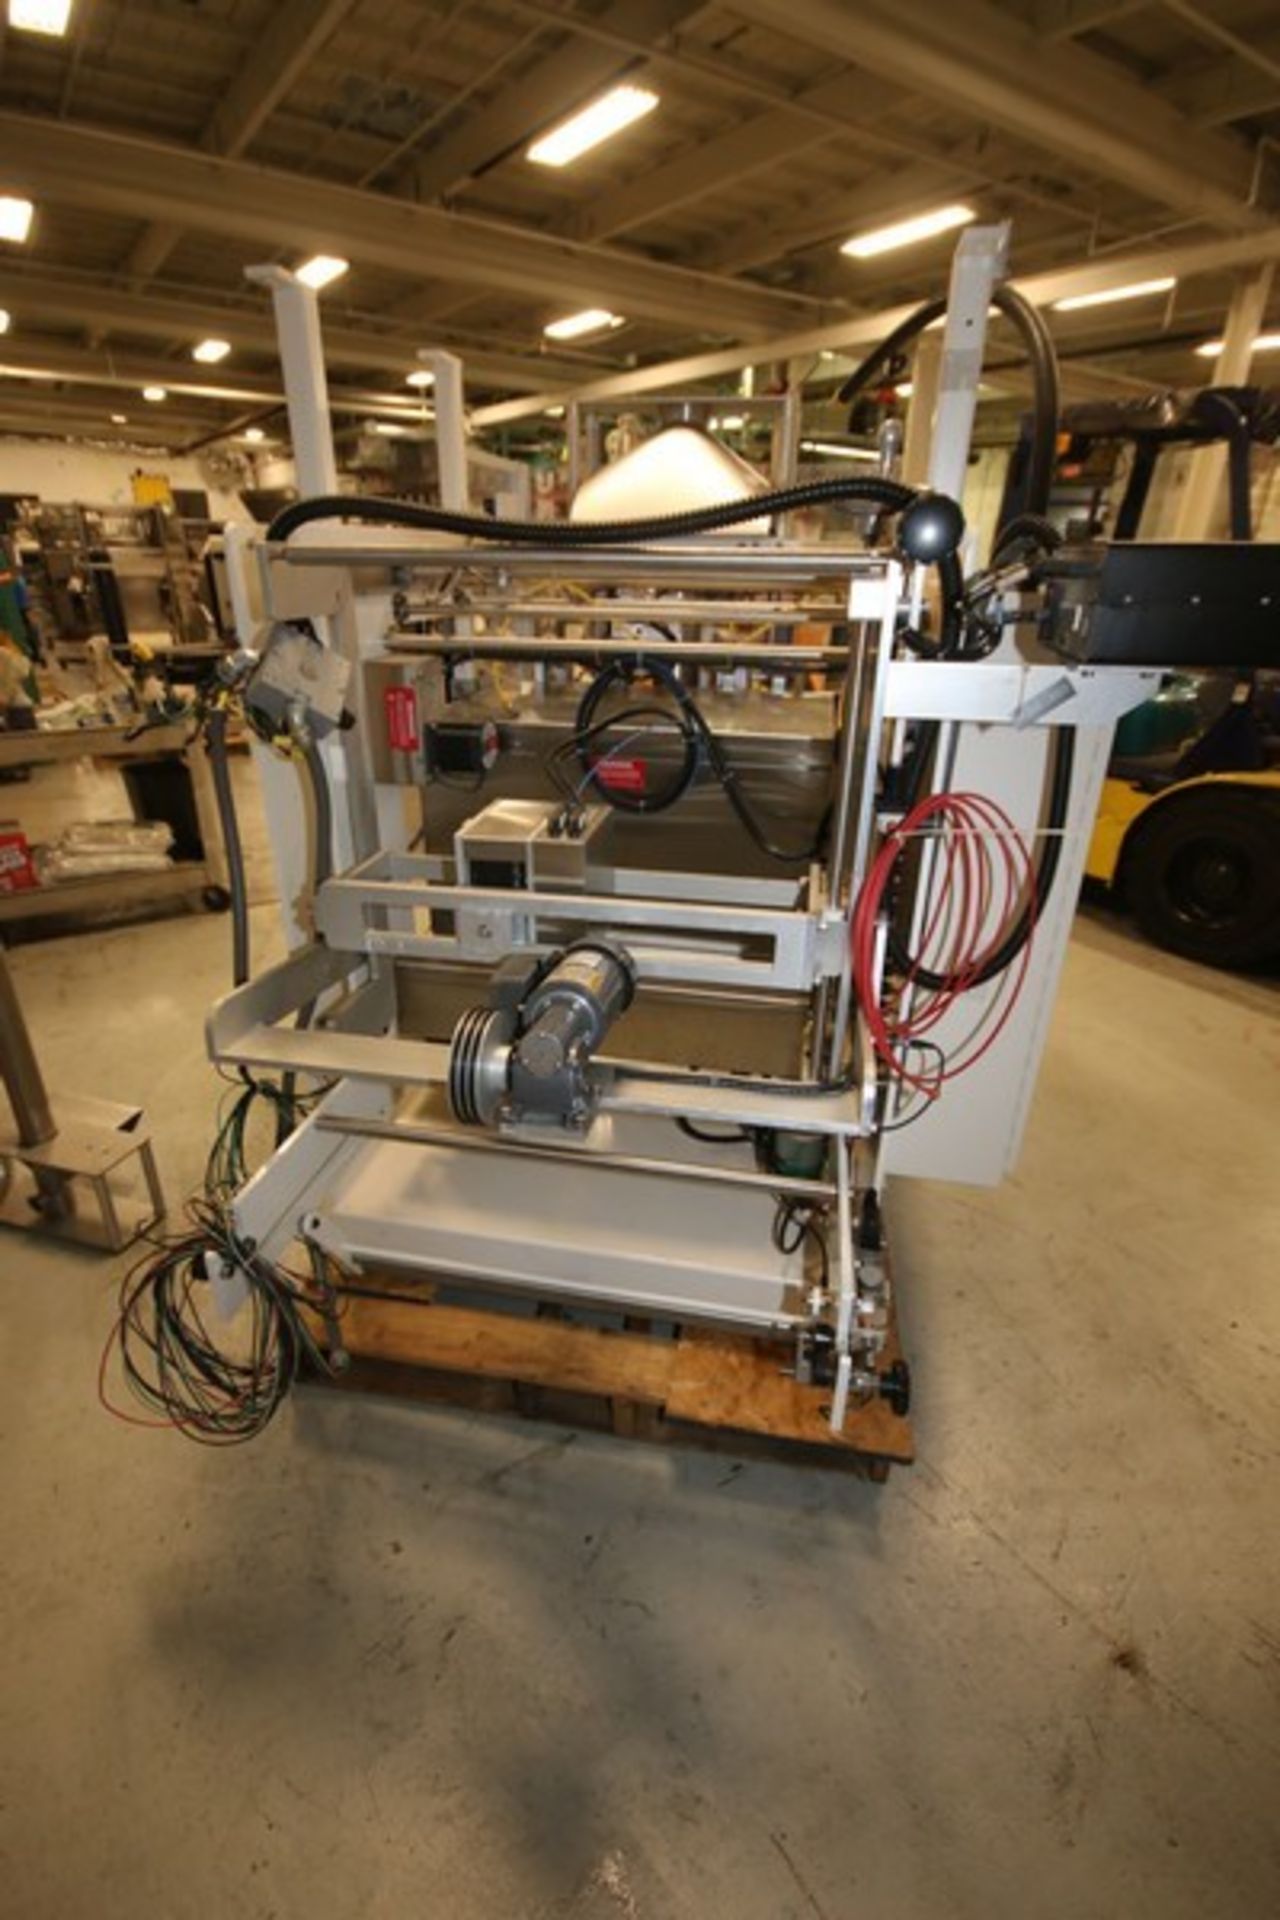 Universal Packaging Vertical Form Fill & Seal Packaging Machine (VFFS), Model S2000C, SN 1711, - Image 8 of 12